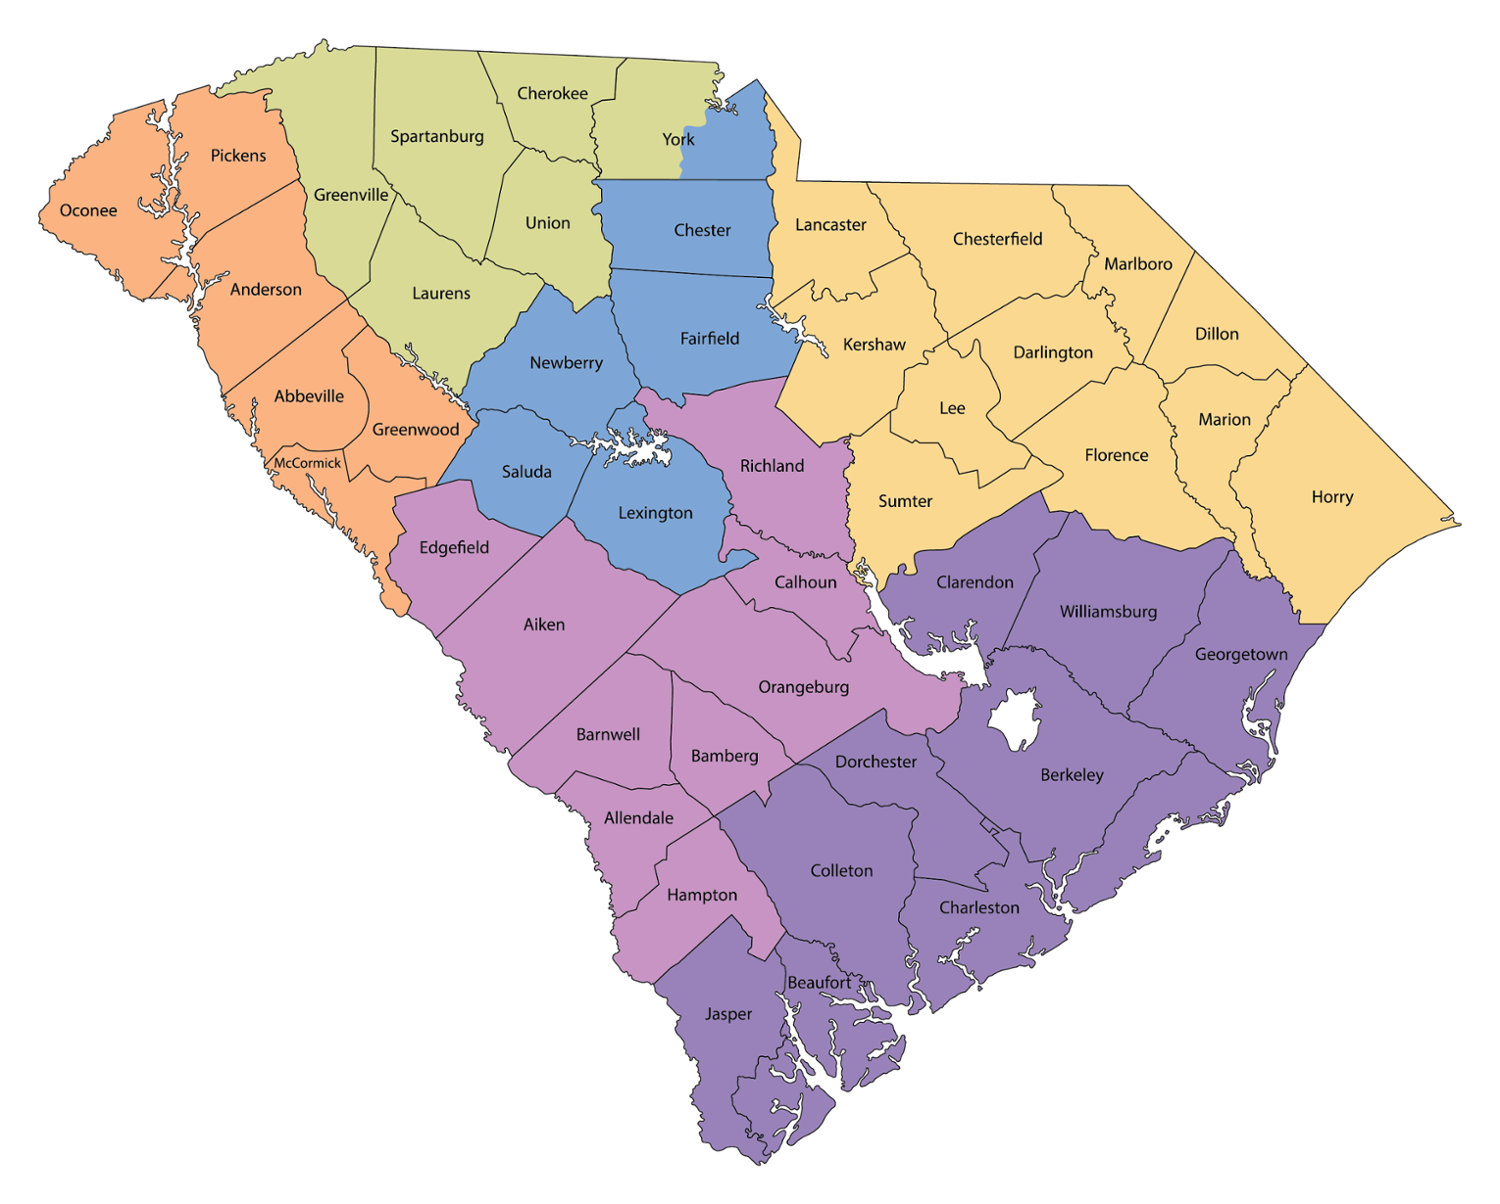 Plant Protection District Specialists Map of South Carolina with regions colored differently, regions defined in text with county responsibilities below each inspectors name.  Abbeville County is Eric Hitzler, Aiken County is Griffin Crider, Allendale County is Griffin Crider,  Anderson County is Eric Hitzler, Bamberg County is Griffin Crider, Barnwell County is Griffin Crider, Beaufort County is Harrison Browder, Berkeley County is Harrison Browder, Calhoun County is Griffin Crider, Charleston County is Harrison Browder, Cherokee County is Ashley Vaughan, Chester County is Ted Zee, Chesterfield County is Nickles Mirmow, Clarendon County is Harrison Browder, North Colleton County is Griffin Crider, South Colleton County is Harrison Browder, Darlington County is Nickles Mirmow, Dillon County is Nickles Mirmow, Dorchester County is Harrison Browder, Edgefield County is Griffin Cride, Fairfield County is Ted Zee, Florence County is Nickles Mirmow, Georgetown County is Harrison Browde, Greenville County is Ashely Vaughan, Greenwood County is Eric Hitzler, Hampton County is Griffin Crider, Horry County is Nickles Mirmow, Jasper County is Griffin Crider, Kershaw County is Nickles Mirmow, Lancaster County is Nickles Mirmow, Laurens County is Ashley Vaughan, Lee County is Nickles Mirmow, Lexington County is Ted Zee, Marion County is Nickles Mirmow, Marlboro County is Nickles Mirmow, McCormick County is Eric Hitzler, Newberry County is Ted Zee, Oconee County is Eric Hitzler, Orangeburg County is Griffin Crider, Pickens County is Eric Hitzler, Richland County is Ted Zee, Saluda County is Ted Zee, Spartanburg County is Ashley Vaughan, Sumter County is Nickles Mirmow, Union County is Ashley Vaughan, Williamsburg County is Harrison Browder, York County is Ted Zee.